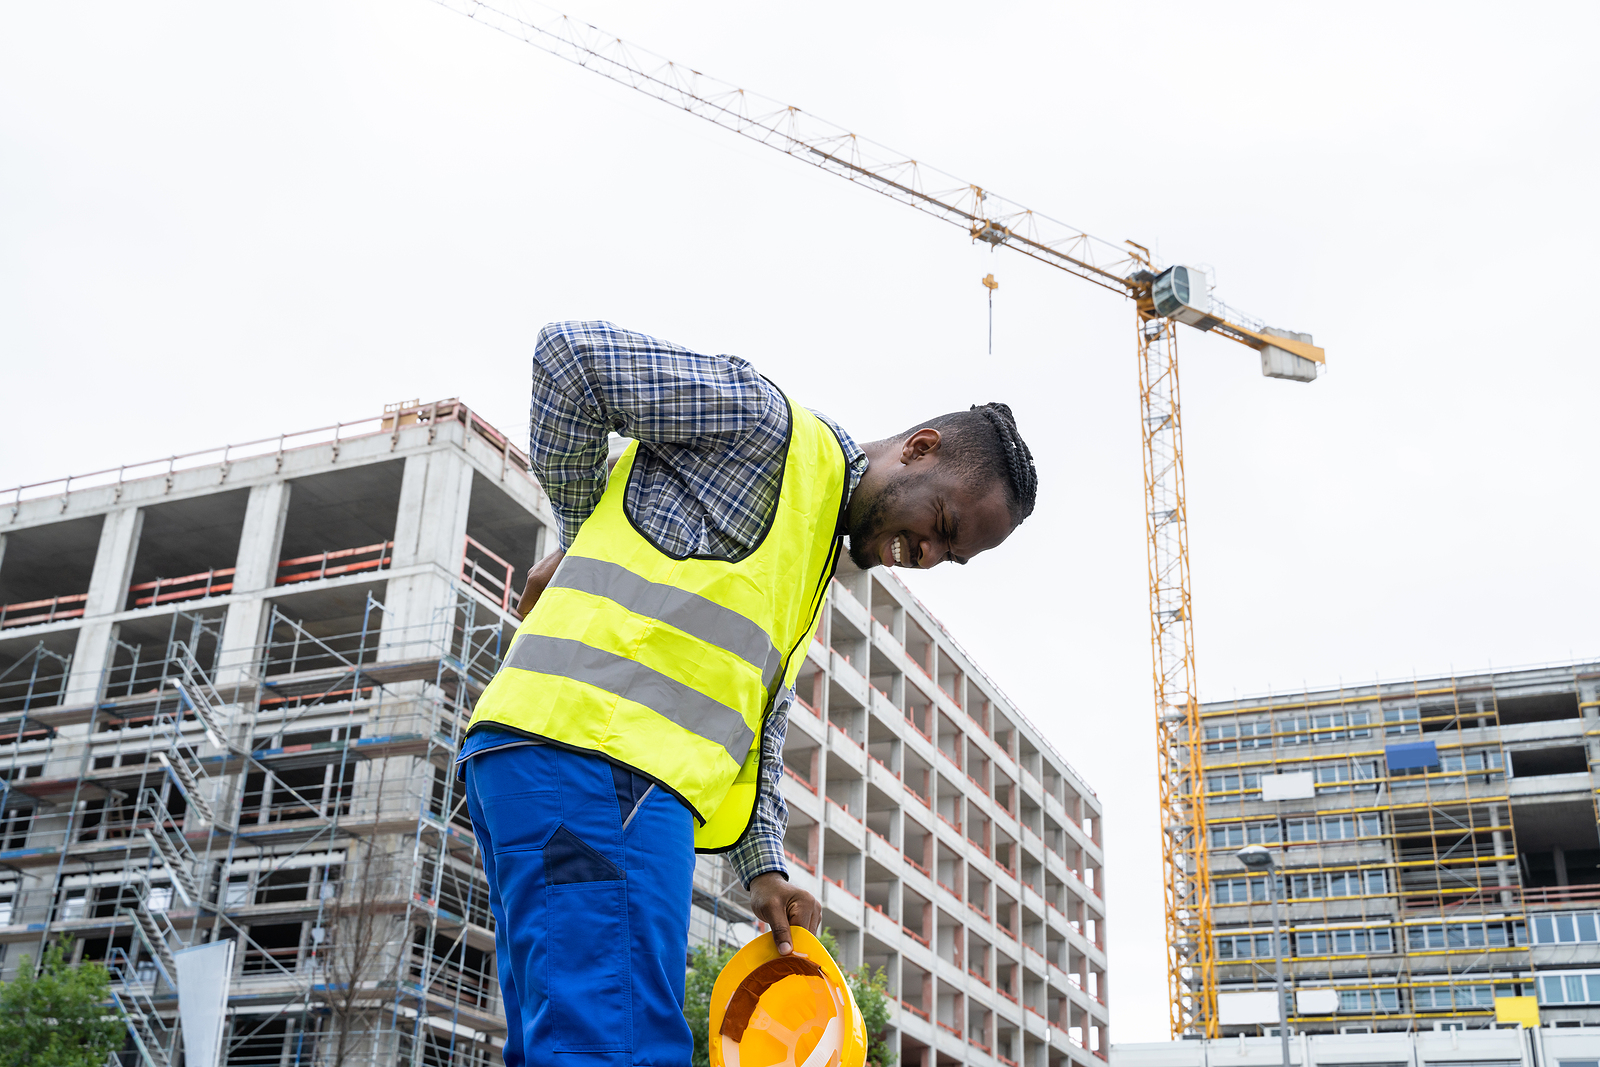 HSE construction site inspections focus on moving & handling materials